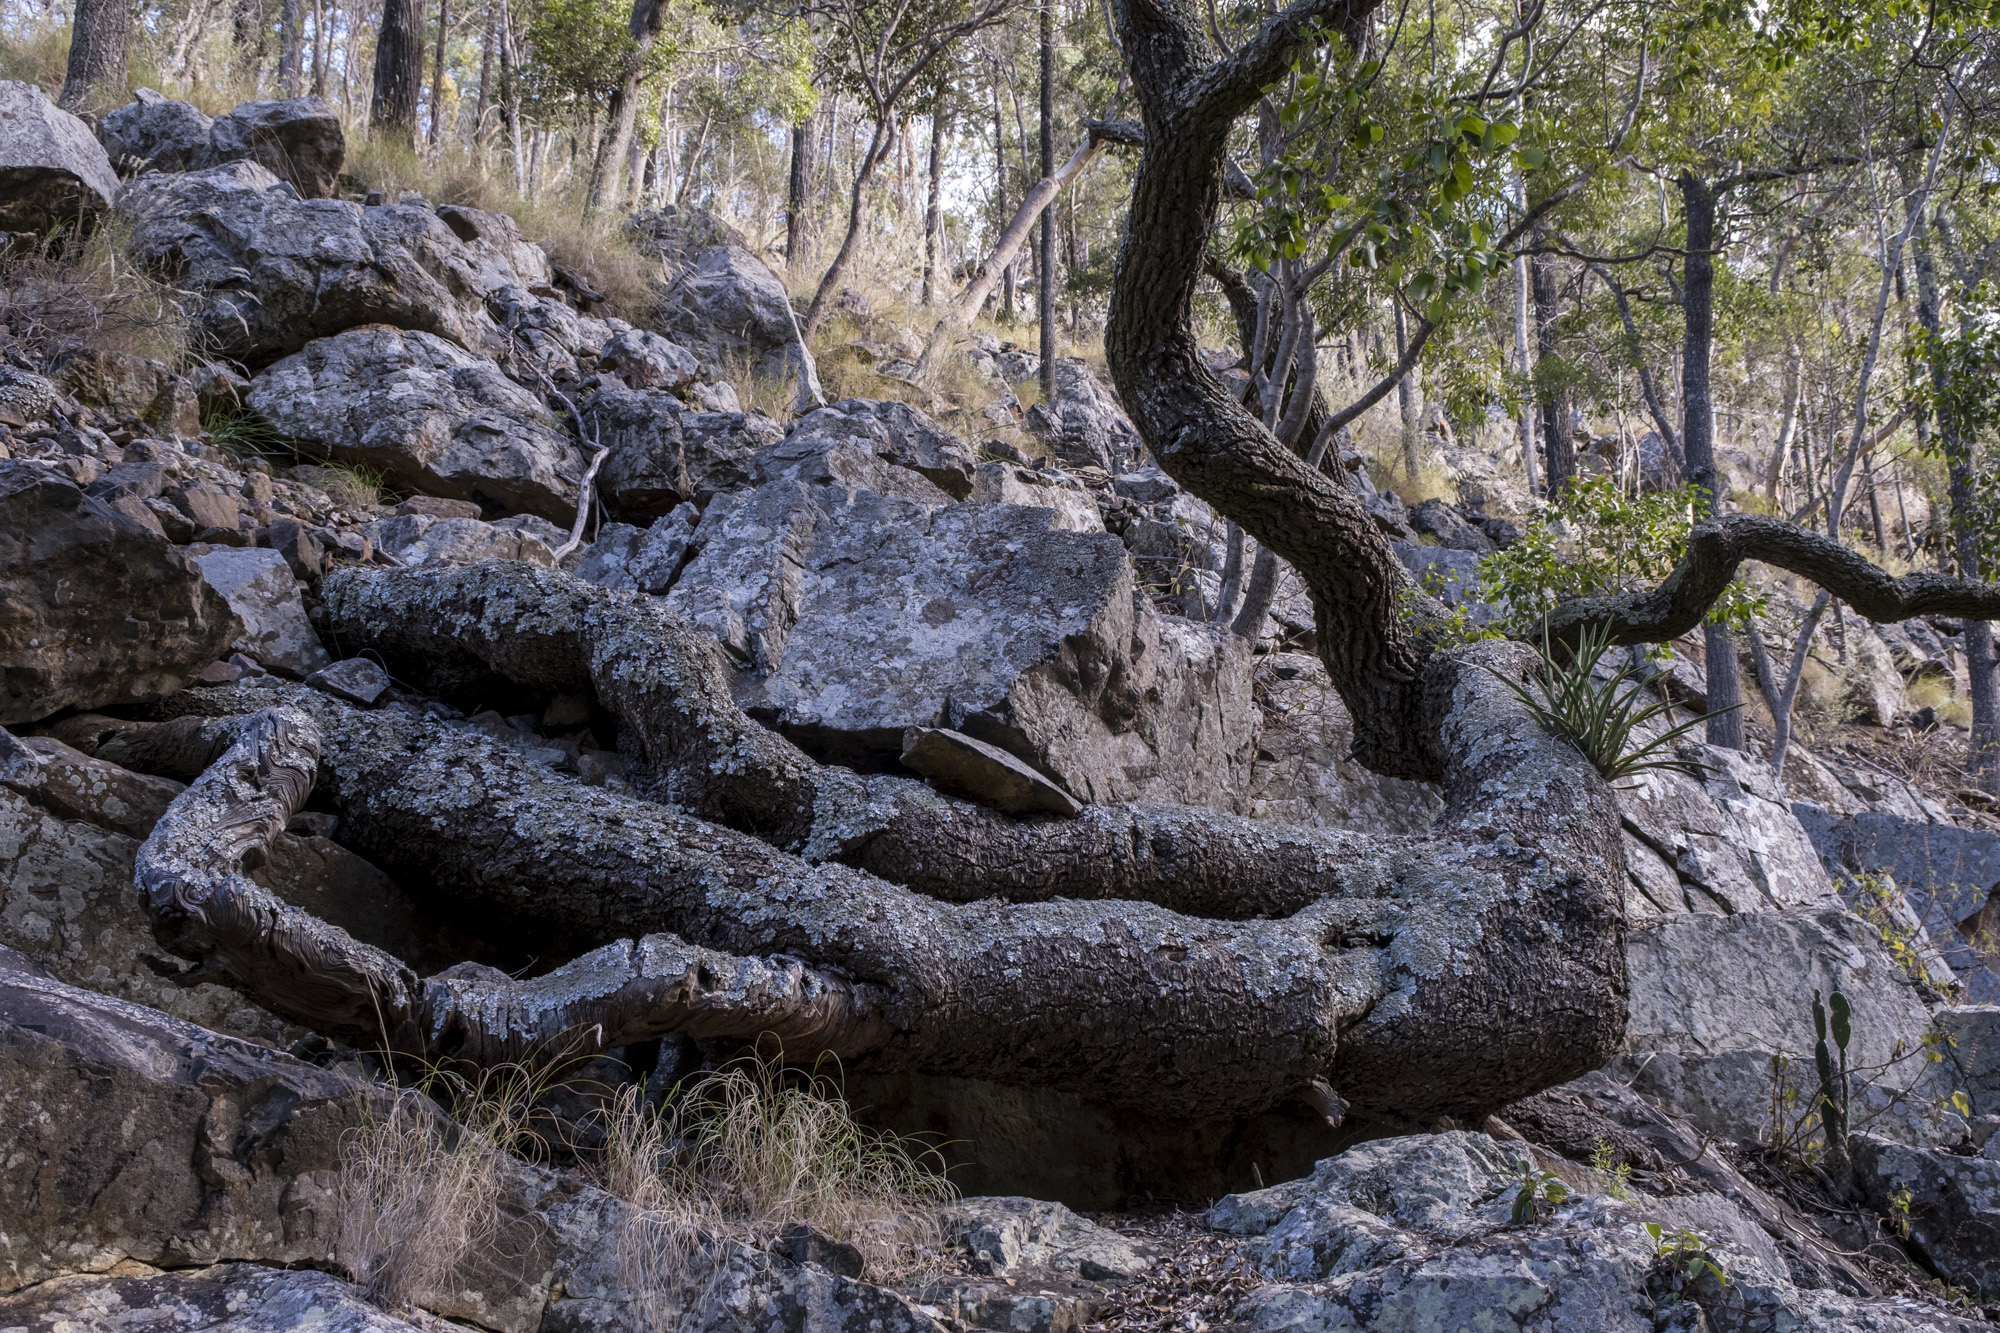 A twisted bole of an Ooline tree grips the traprock on the side of the gorge - image Ian Brown